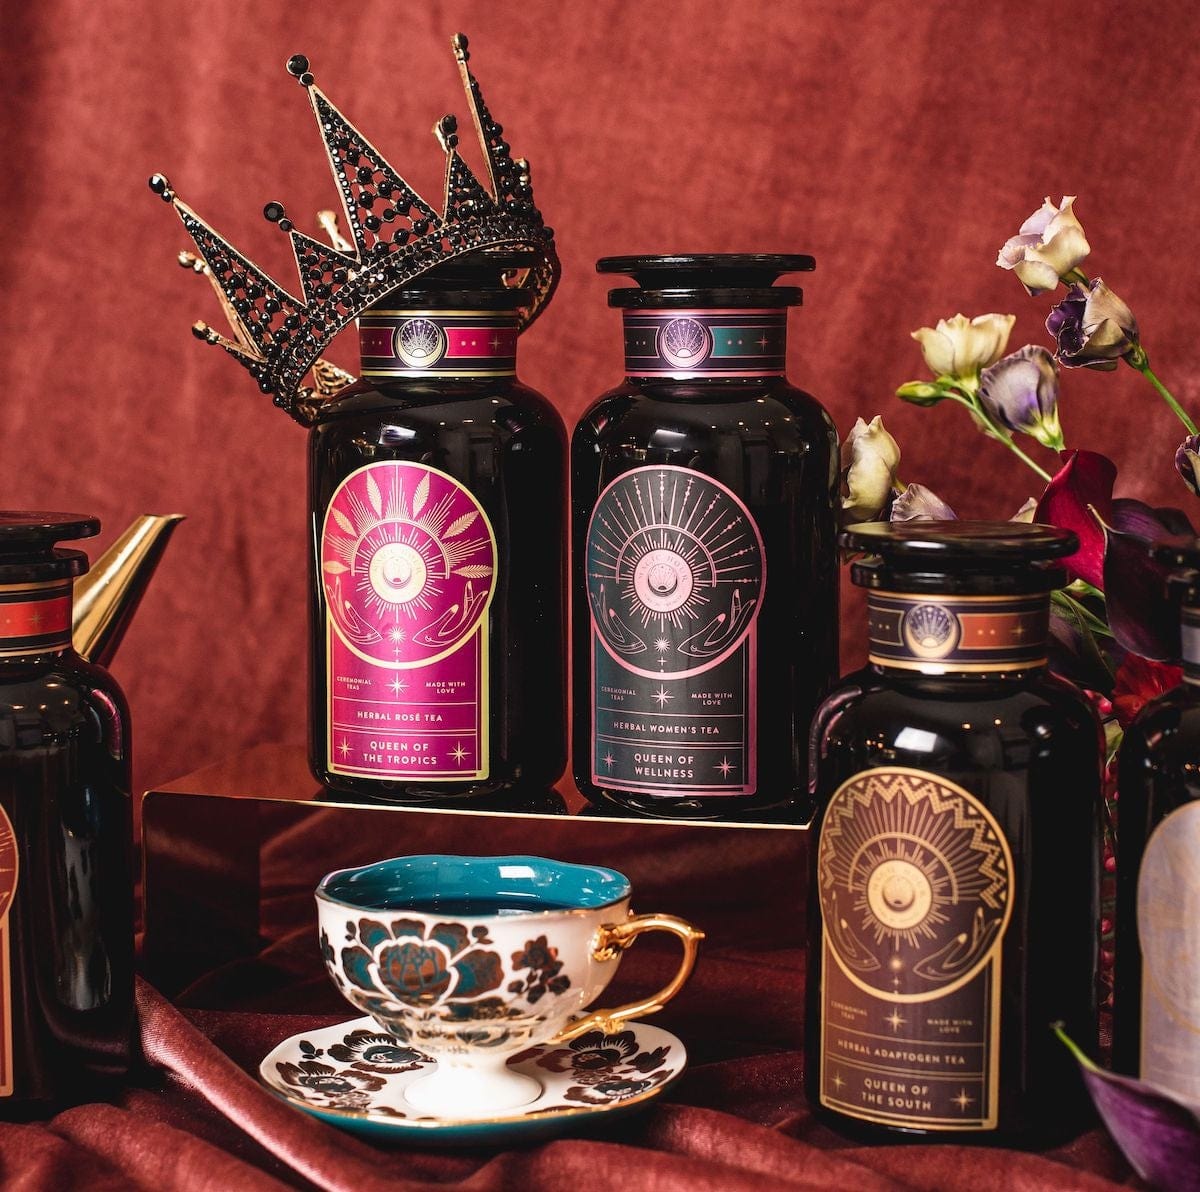 A luxurious display of three ornate tea containers featuring Queen of Wellness: Women&#39;s Hormone Balancing Tea for PMS, Healthy Cycles &amp; Menopause by Magic Hour with regal labels, set against a rich, burgundy backdrop. A decorative crown rests atop one container, and a beautifully detailed teacup and saucer sit nearby. Delicate flowers add a touch of elegance to the scene.